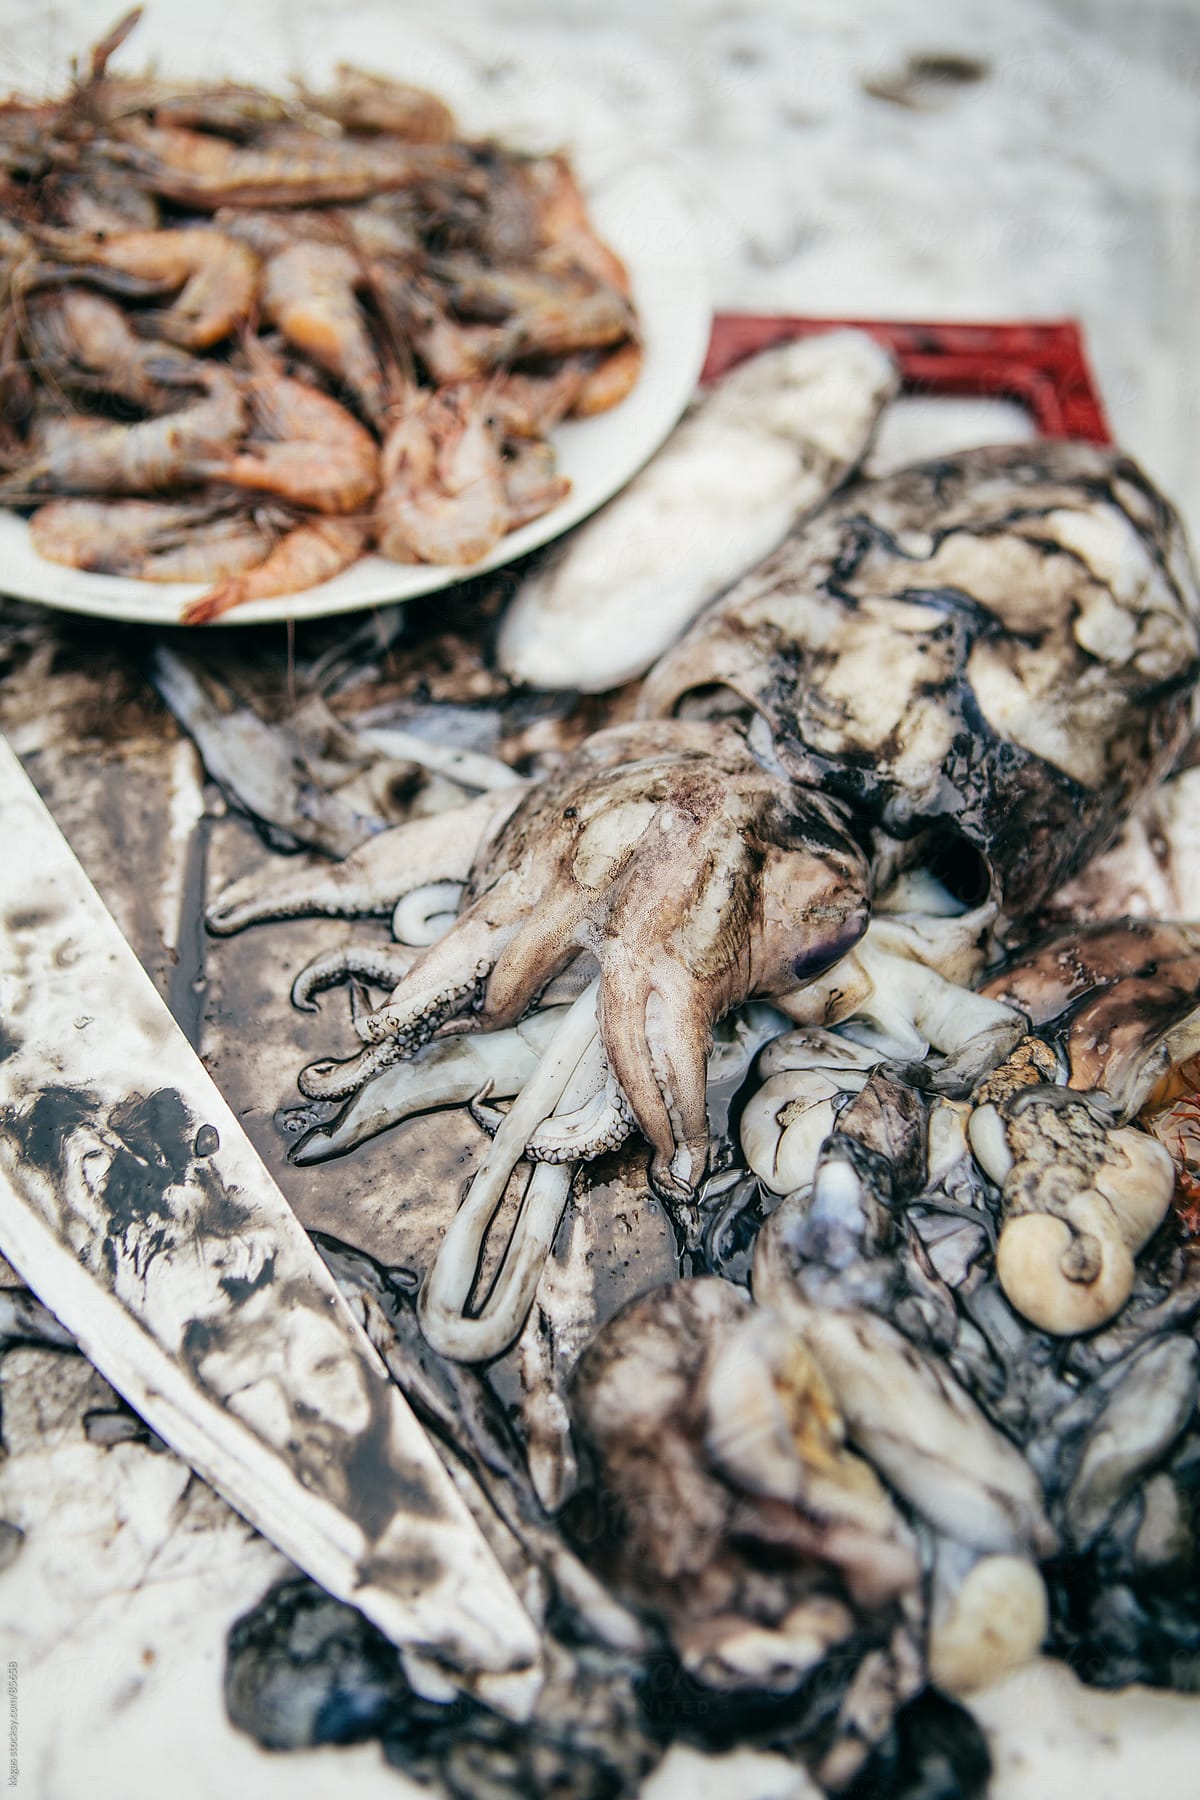 Cuttlefish and prawns in the process of being prepared for cooking